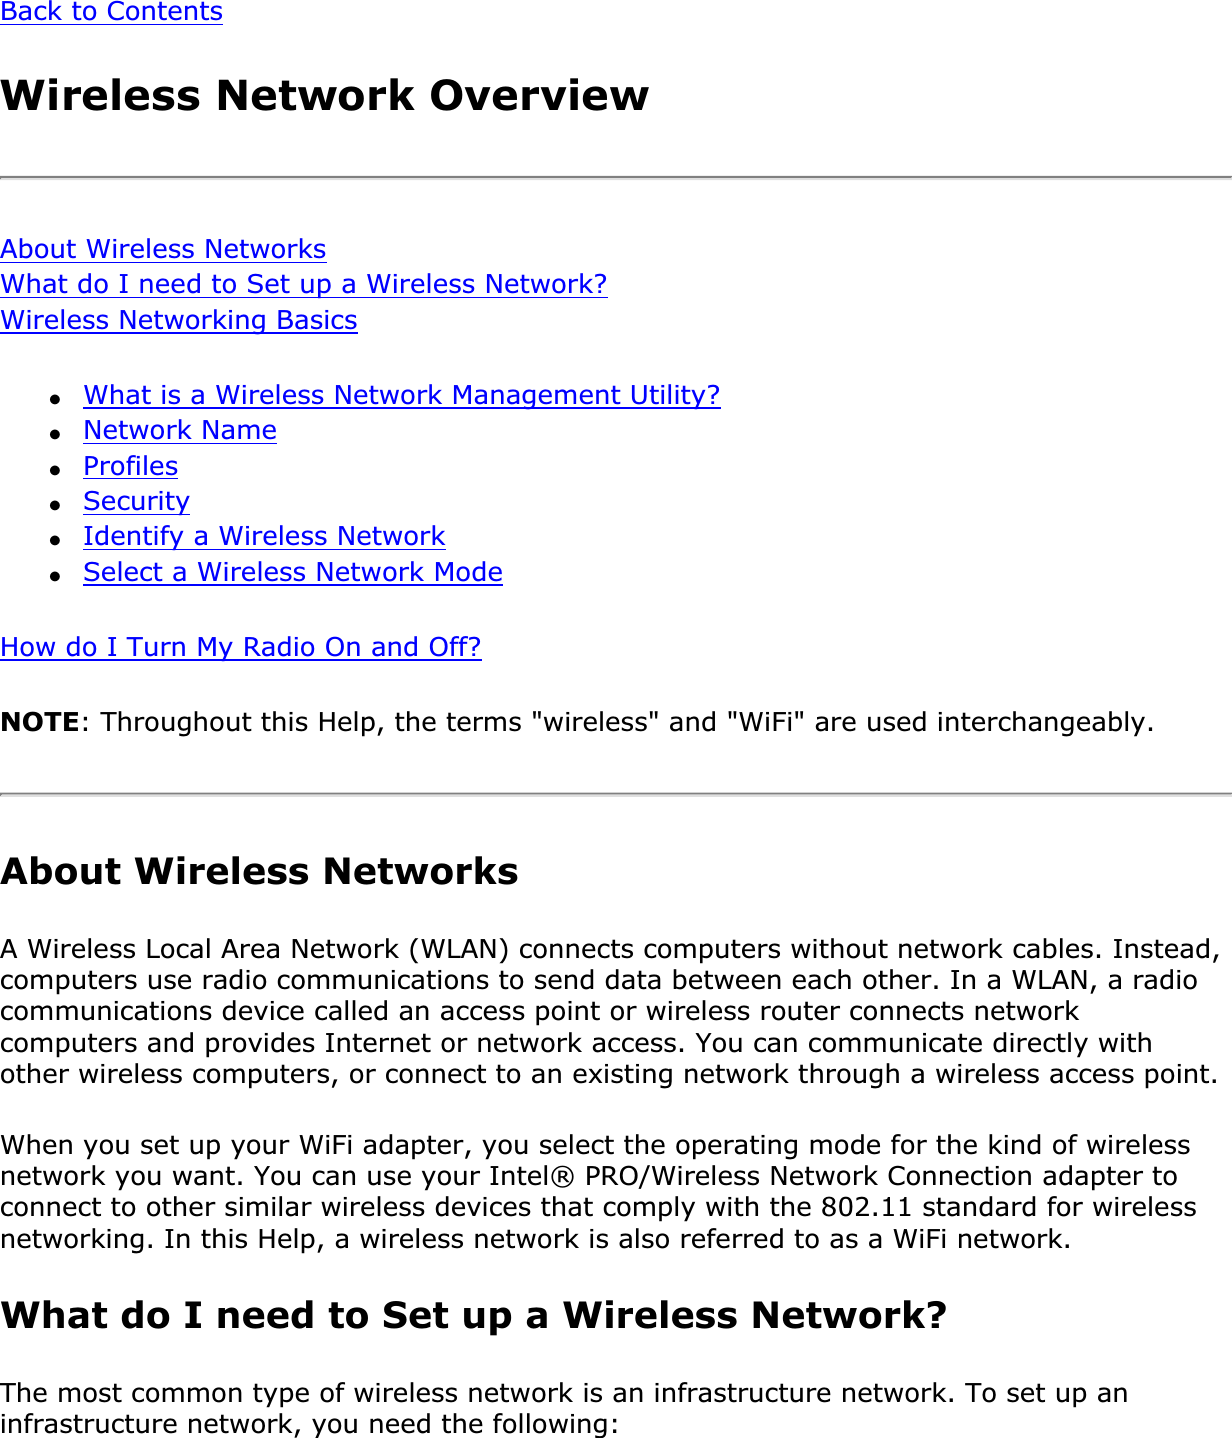 Back to ContentsWireless Network OverviewAbout Wireless NetworksWhat do I need to Set up a Wireless Network?Wireless Networking Basics●What is a Wireless Network Management Utility?●Network Name●Profiles●Security●Identify a Wireless Network●Select a Wireless Network ModeHow do I Turn My Radio On and Off?NOTE: Throughout this Help, the terms &quot;wireless&quot; and &quot;WiFi&quot; are used interchangeably. About Wireless NetworksA Wireless Local Area Network (WLAN) connects computers without network cables. Instead, computers use radio communications to send data between each other. In a WLAN, a radio communications device called an access point or wireless router connects network computers and provides Internet or network access. You can communicate directly with other wireless computers, or connect to an existing network through a wireless access point. When you set up your WiFi adapter, you select the operating mode for the kind of wireless network you want. You can use your Intel® PRO/Wireless Network Connection adapter to connect to other similar wireless devices that comply with the 802.11 standard for wireless networking. In this Help, a wireless network is also referred to as a WiFi network. What do I need to Set up a Wireless Network? The most common type of wireless network is an infrastructure network. To set up an infrastructure network, you need the following: